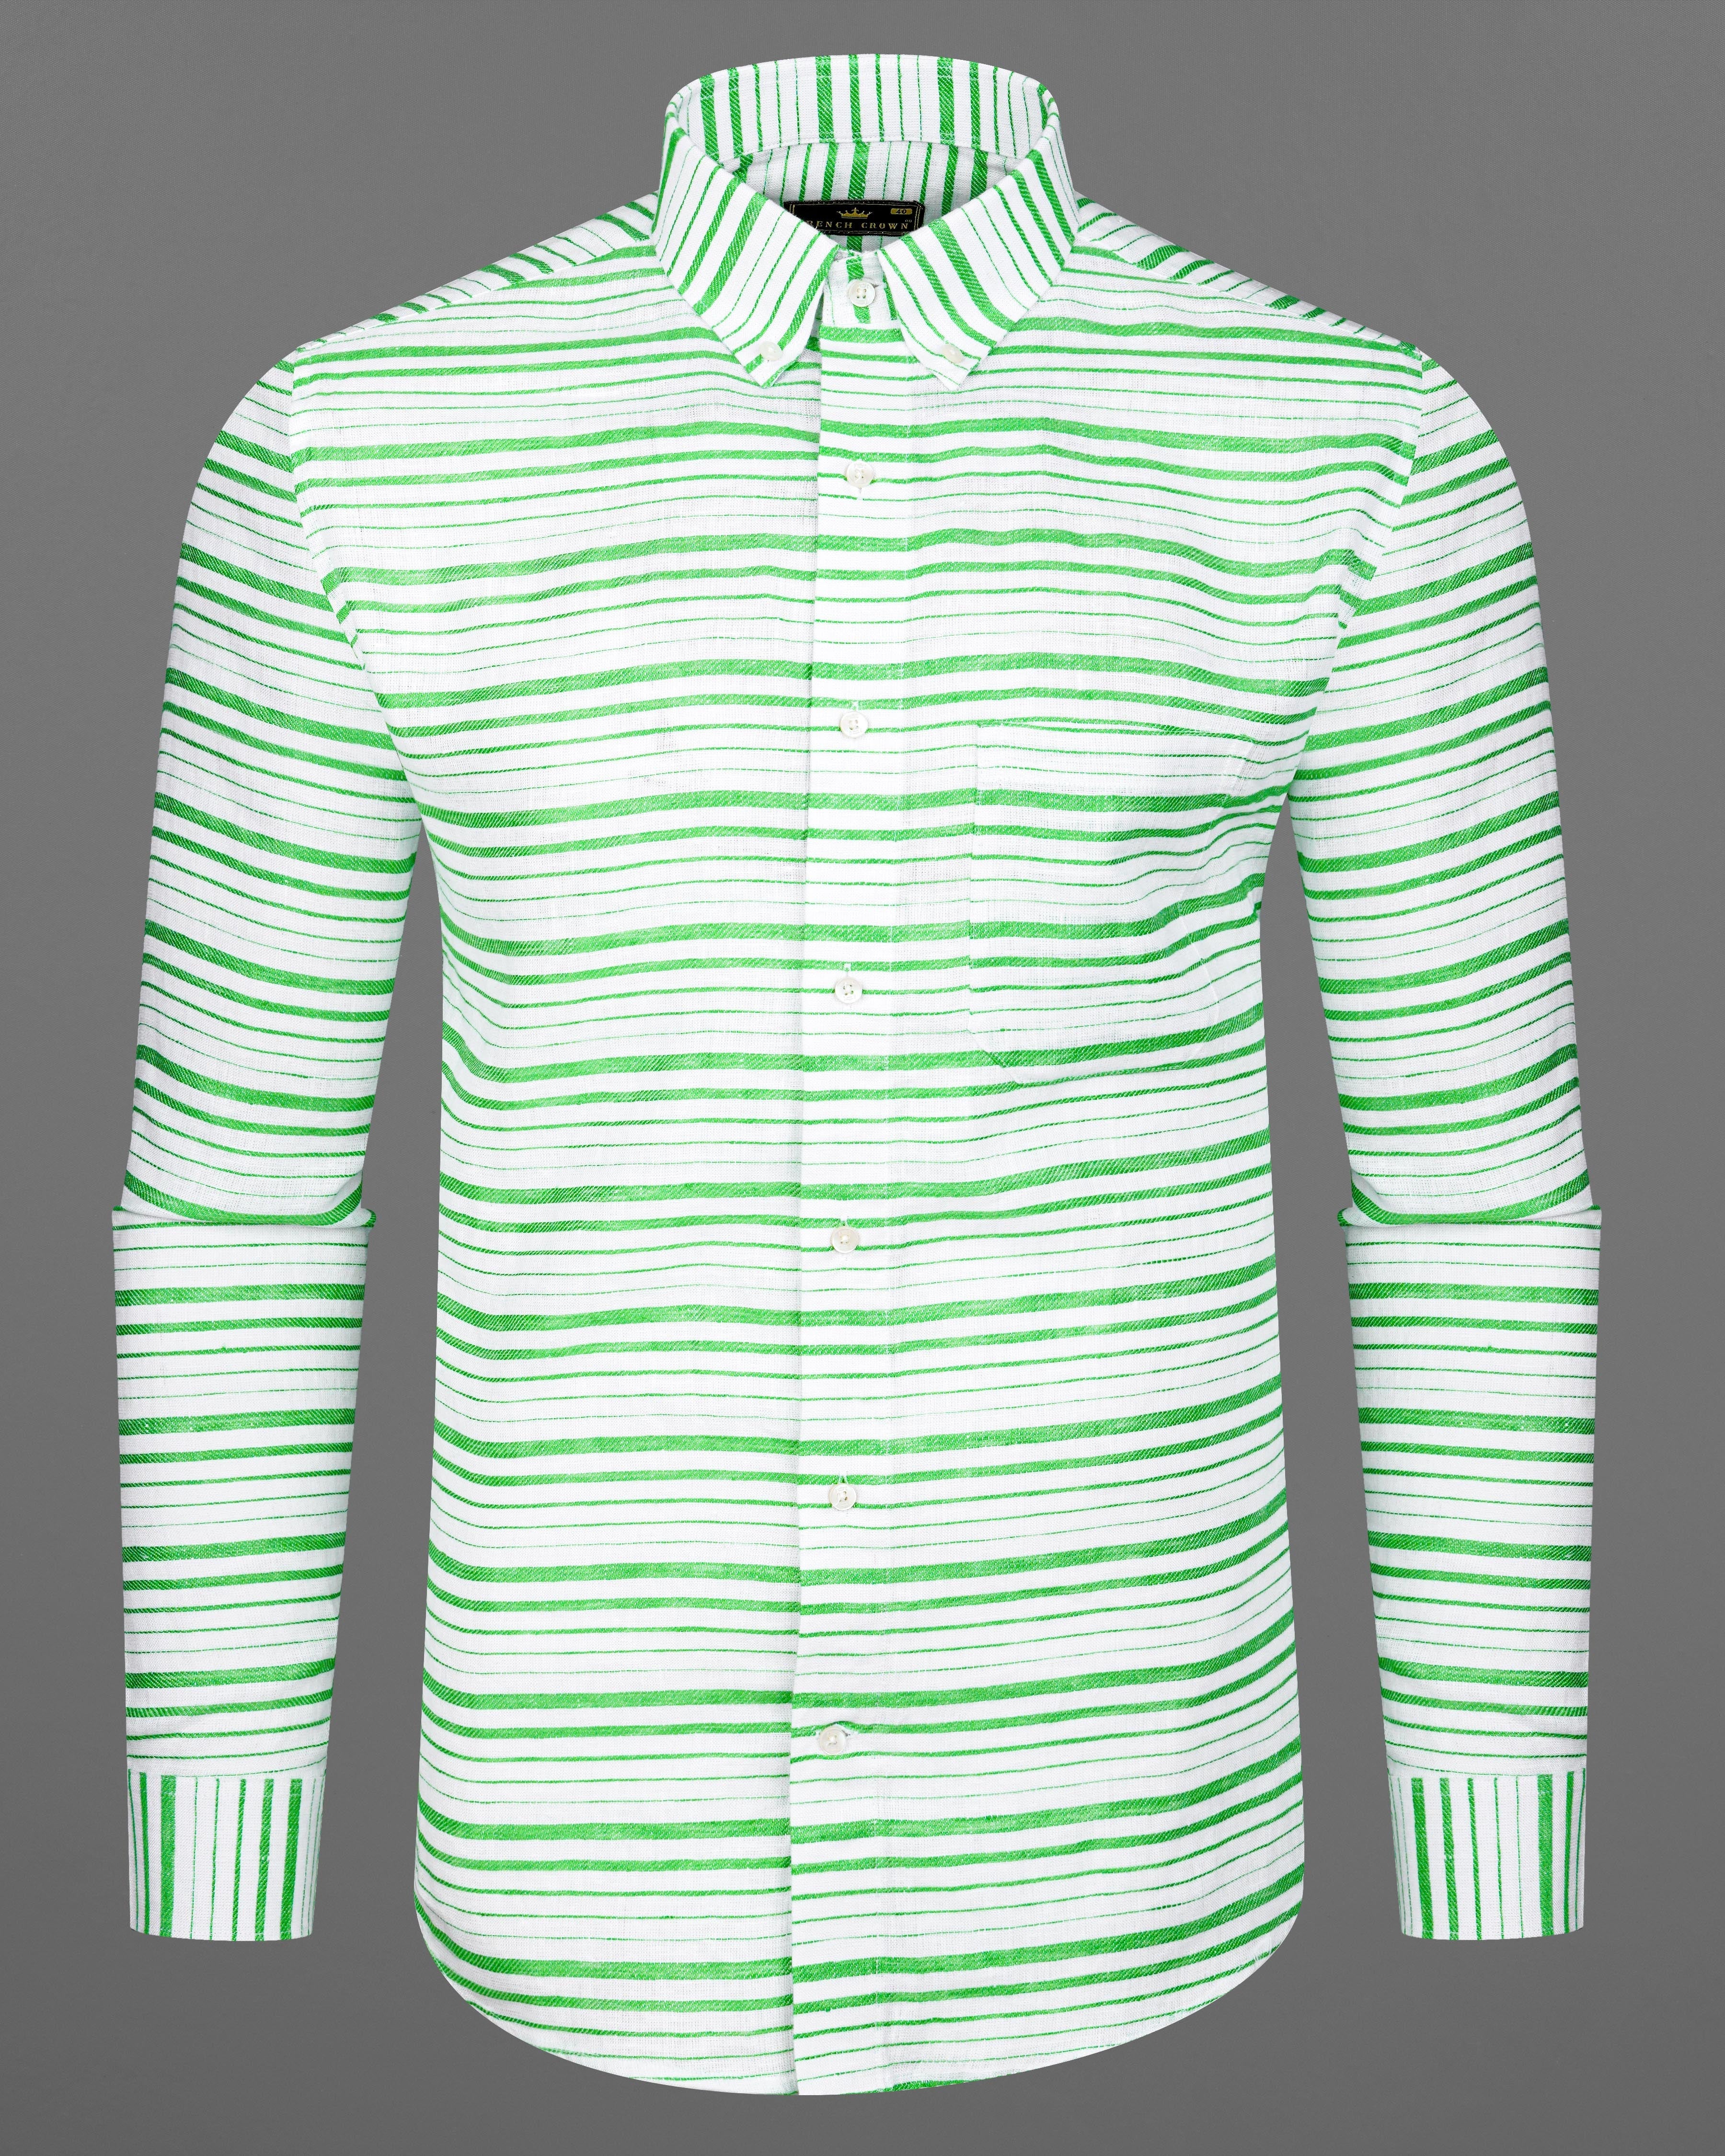 Bright White and Chateau Green Striped Luxurious Linen Shirt 8283-BD-38, 8283-BD-H-38, 8283-BD-39, 8283-BD-H-39, 8283-BD-40, 8283-BD-H-40, 8283-BD-42, 8283-BD-H-42, 8283-BD-44, 8283-BD-H-44, 8283-BD-46, 8283-BD-H-46, 8283-BD-48, 8283-BD-H-48, 8283-BD-50, 8283-BD-H-50, 8283-BD-52, 8283-BD-H-52